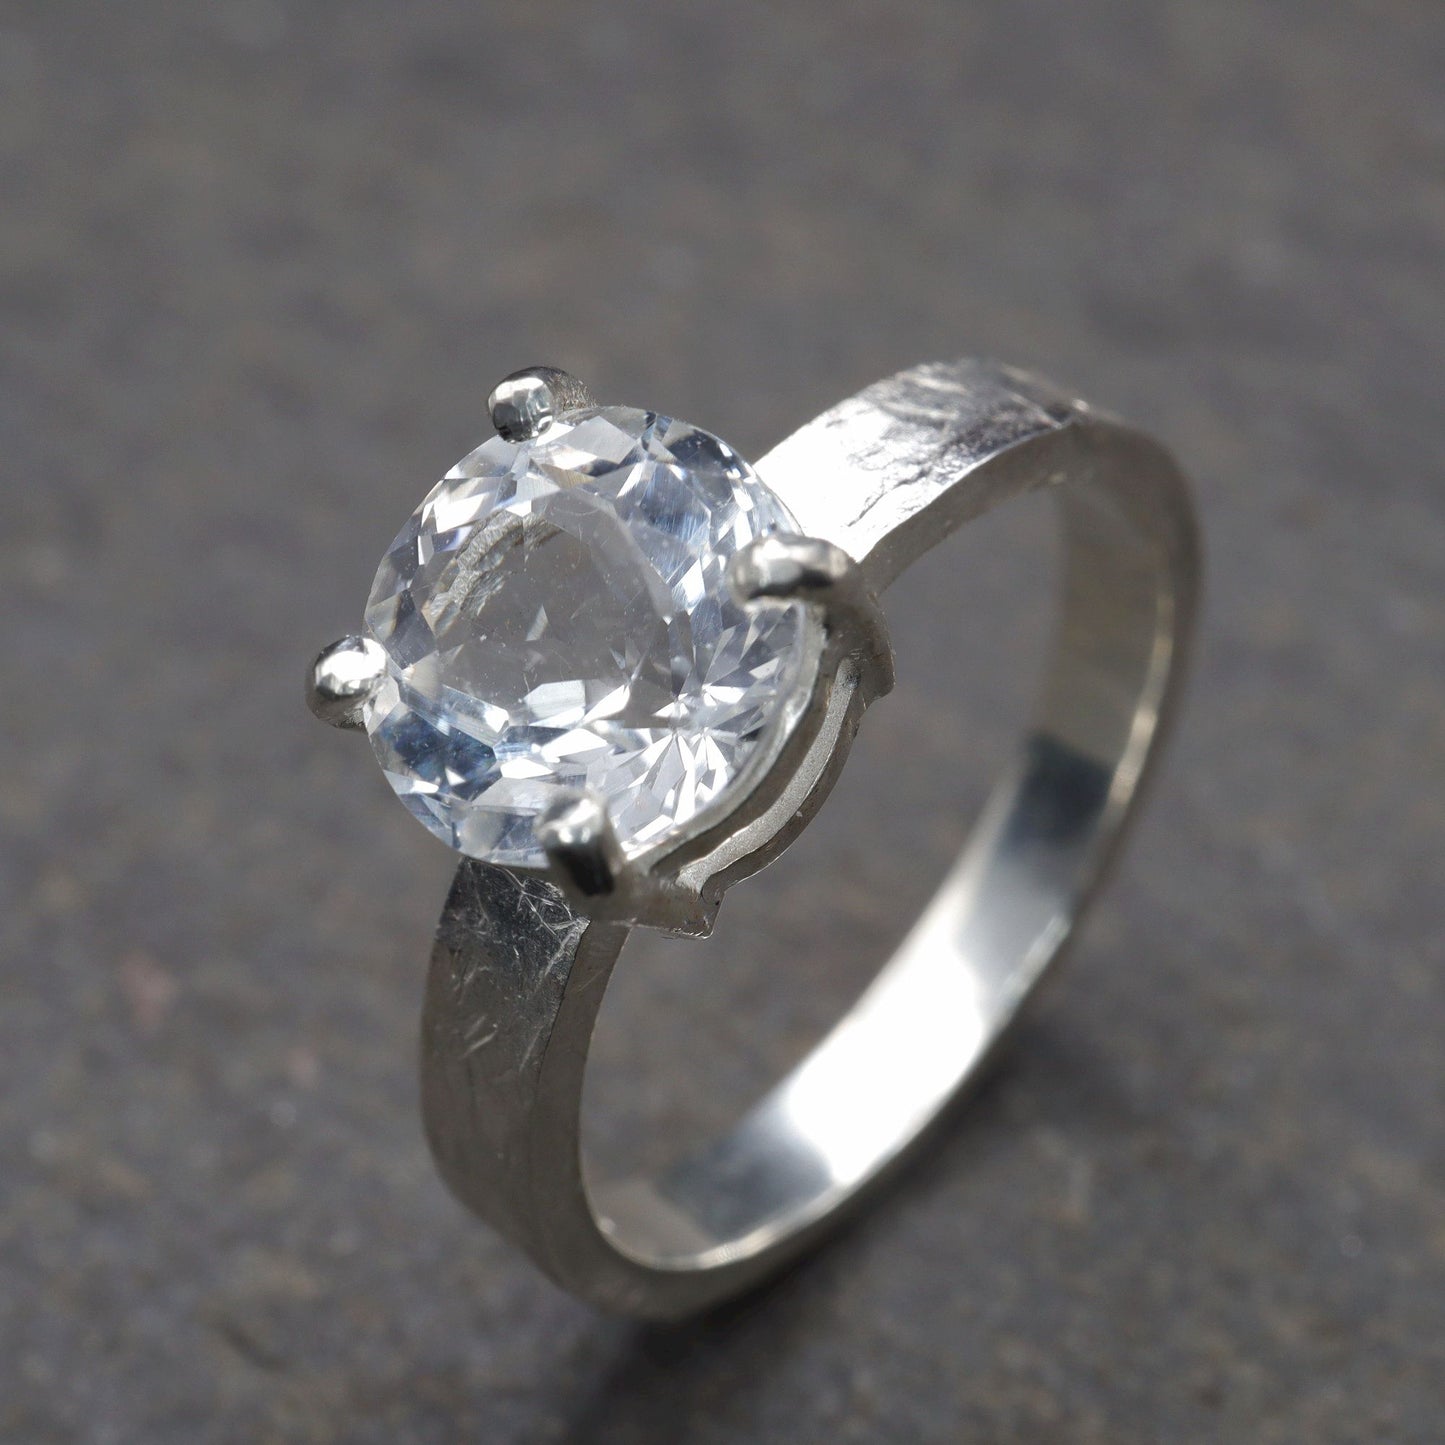 White Topaz large solitaire ring, Windermere design